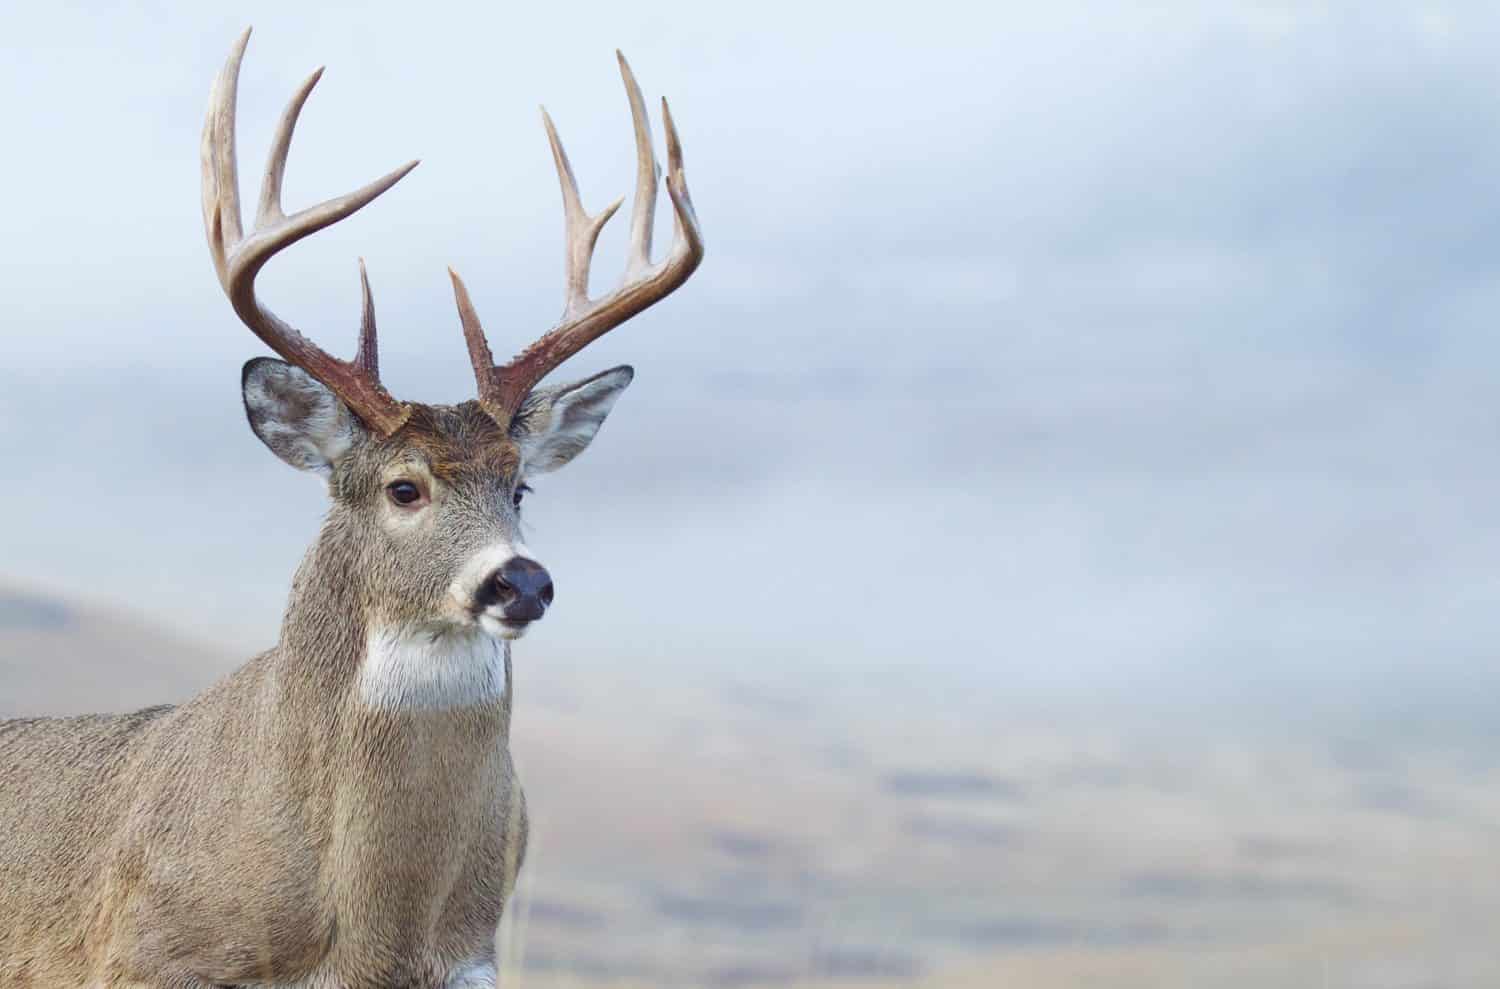 Whitetail Buck Deer close up portrait of large trophy class stag during hunting season